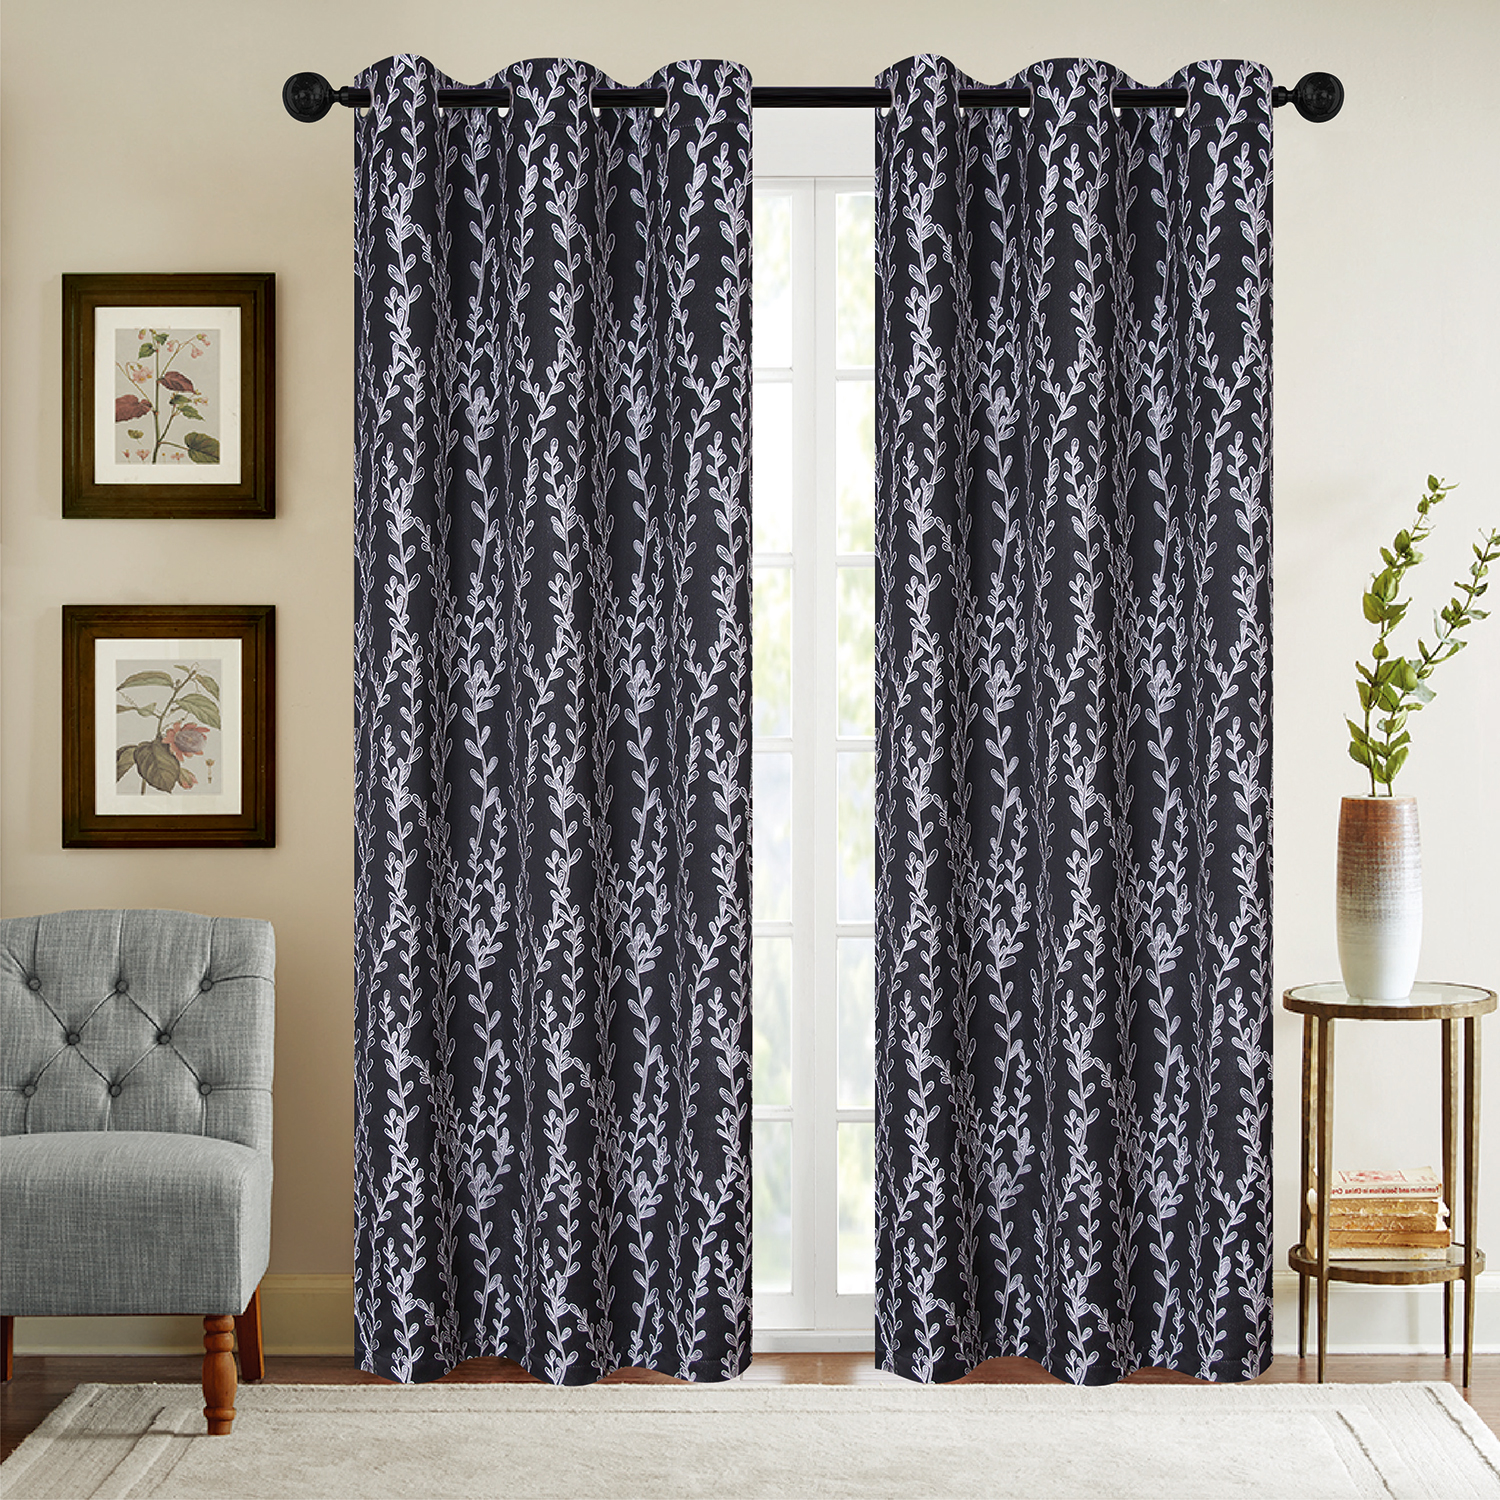 Nelli - Two jacquard panels with grommets 38"x84", black